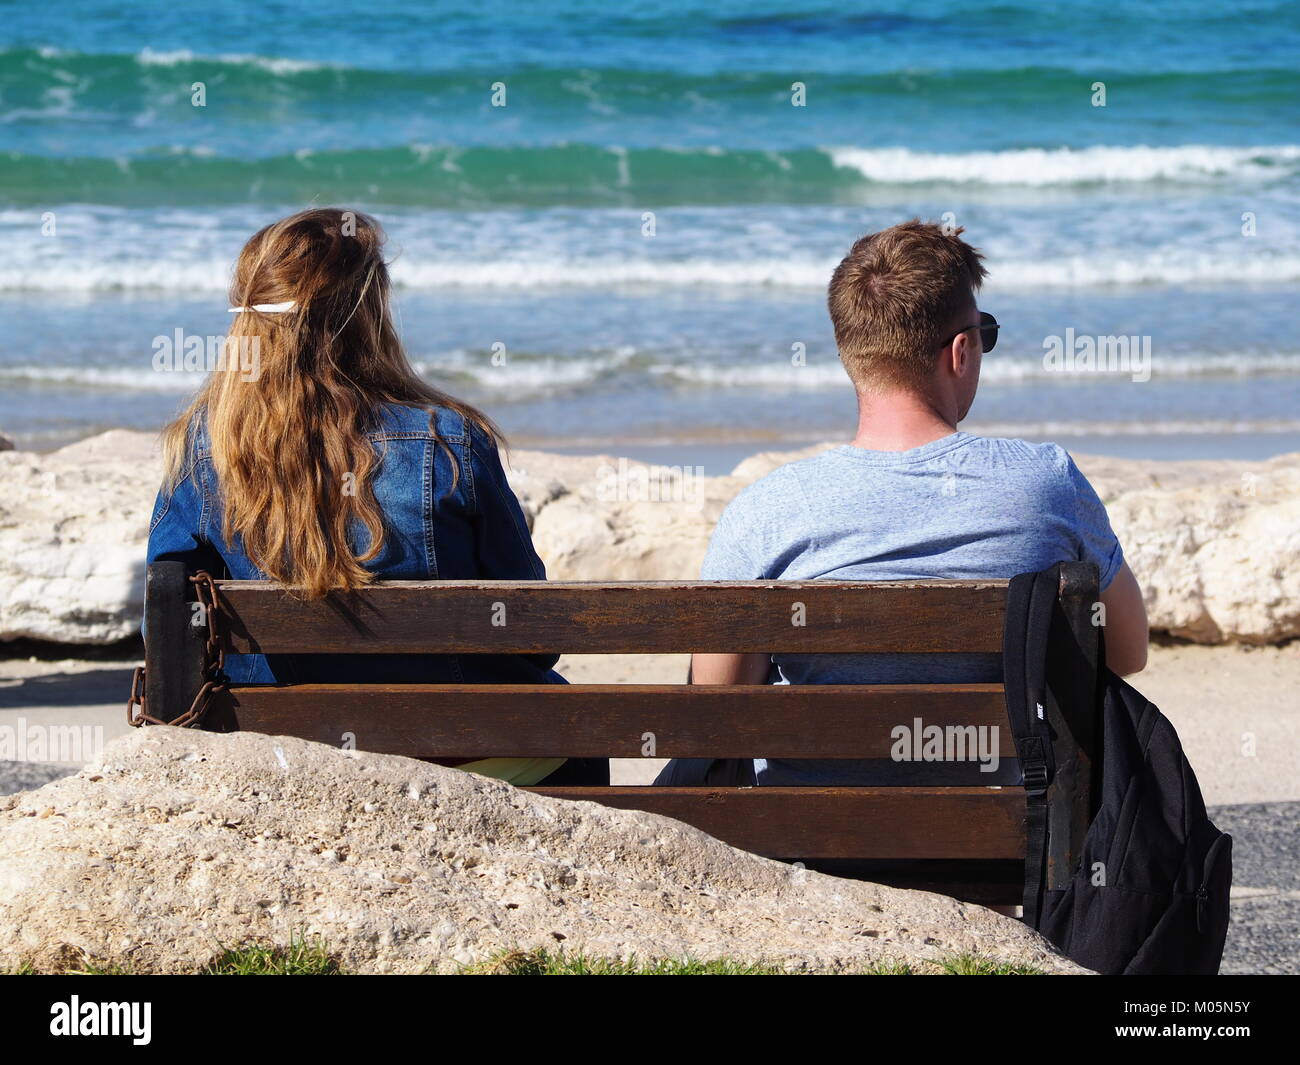 two Friends sitting on a bench on the beach promenade on a perfect clear day watching the sea Stock Photo